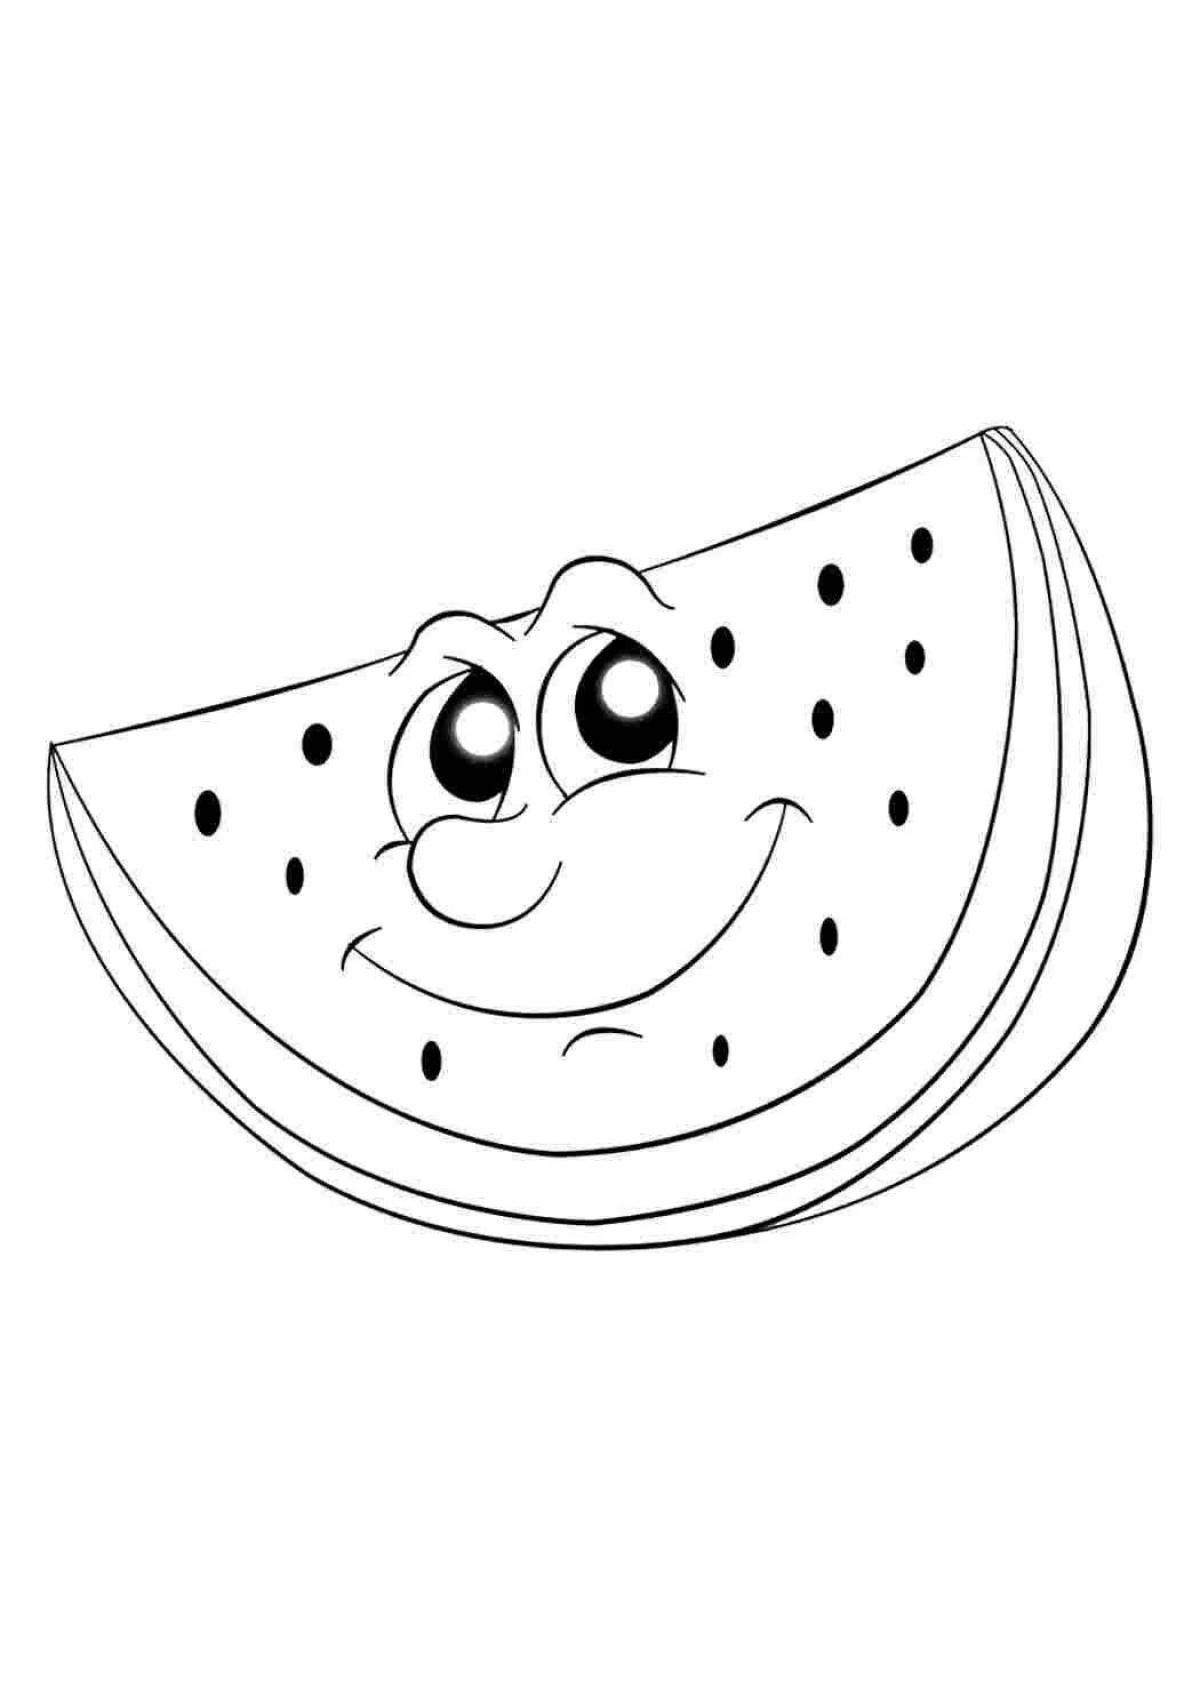 Detail drawing of a watermelon